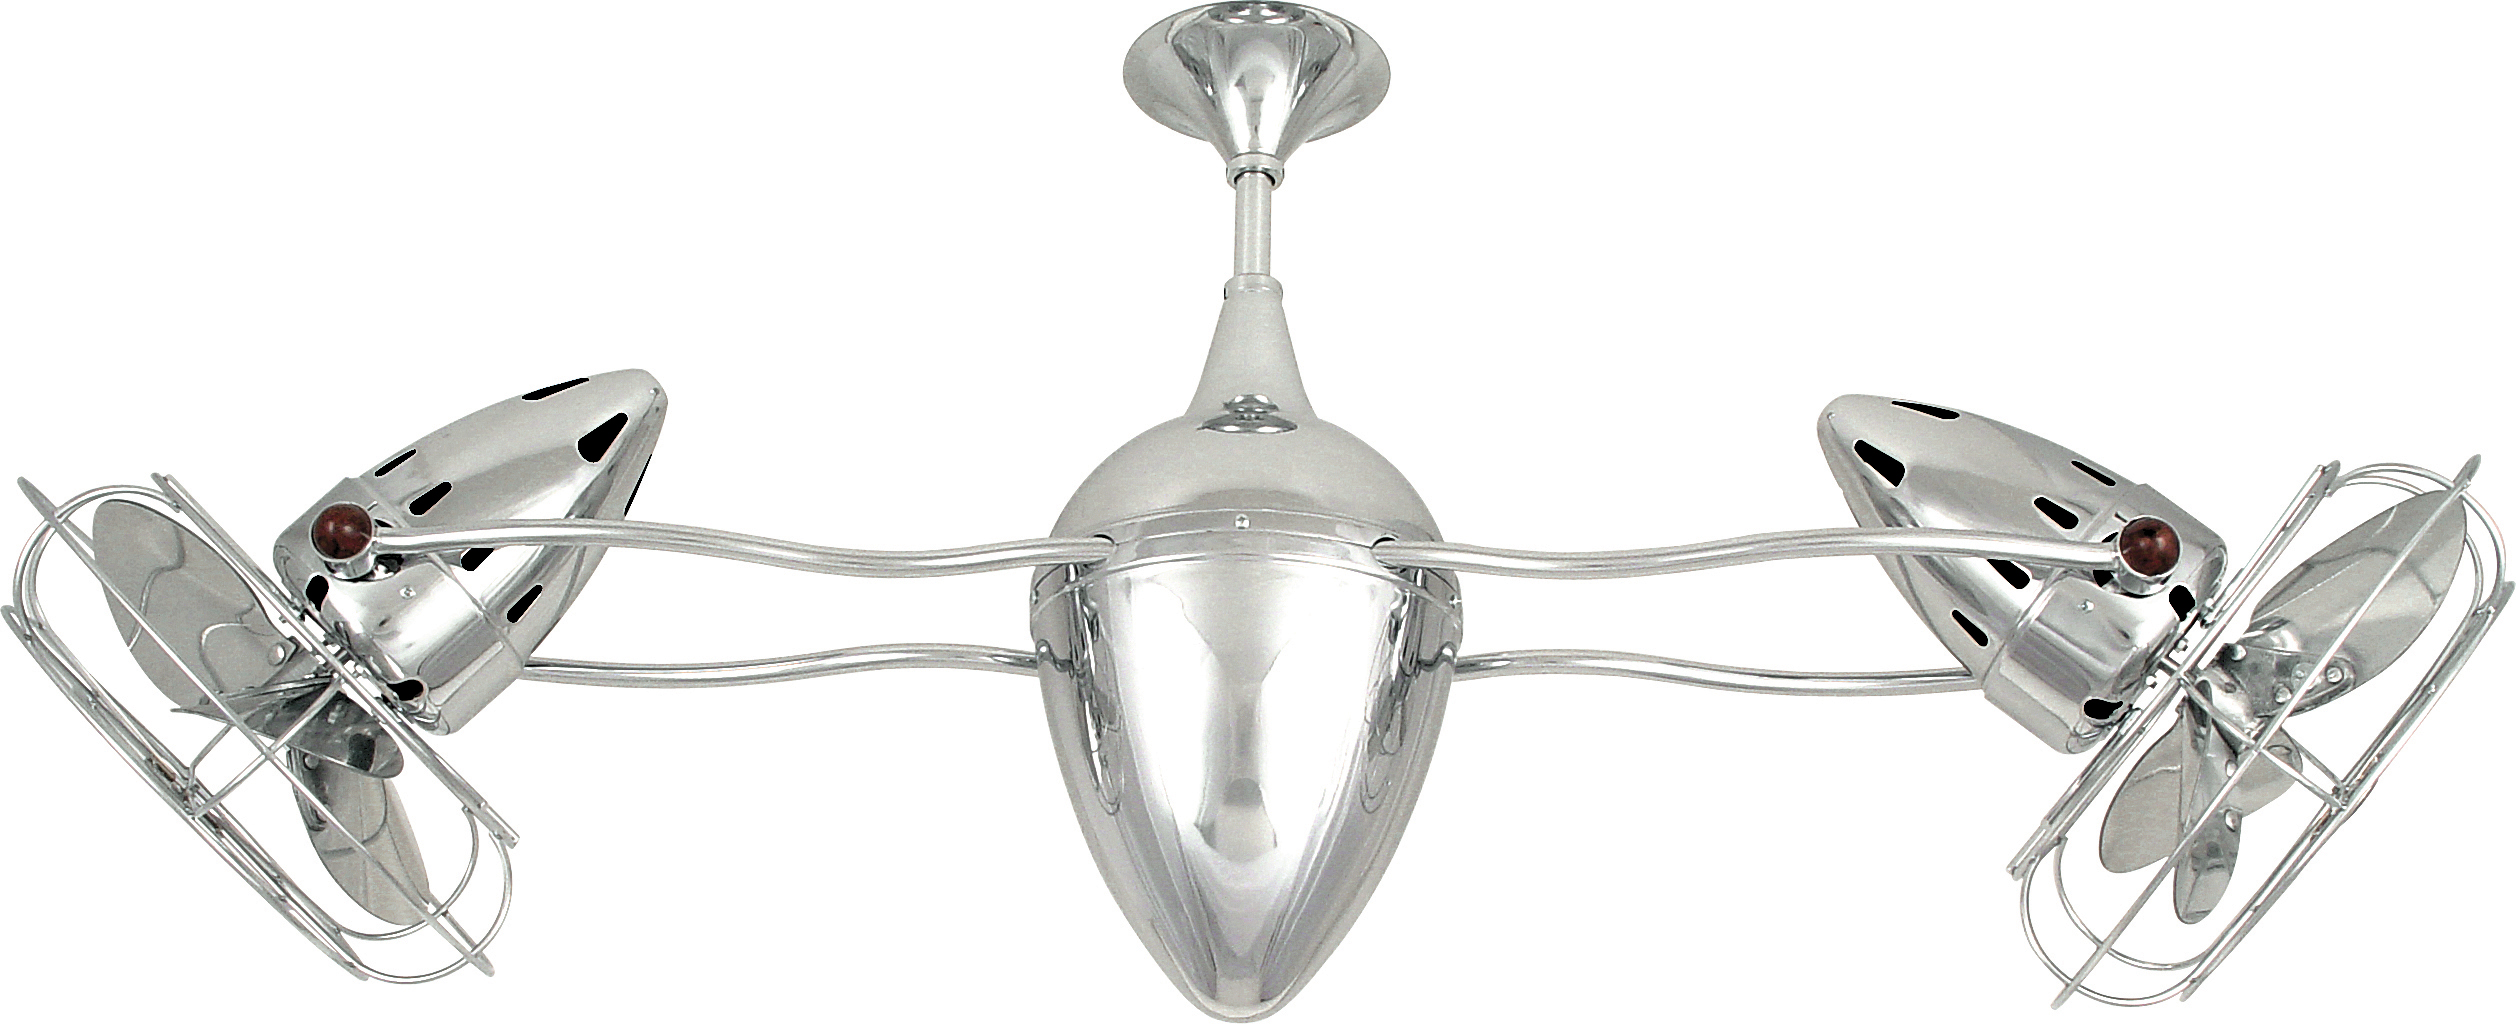 Ar Ruthiane dual headed rotational ceiling fan in Polished Chrome with metal blades and decorative cage made by Matthews Fan Company.